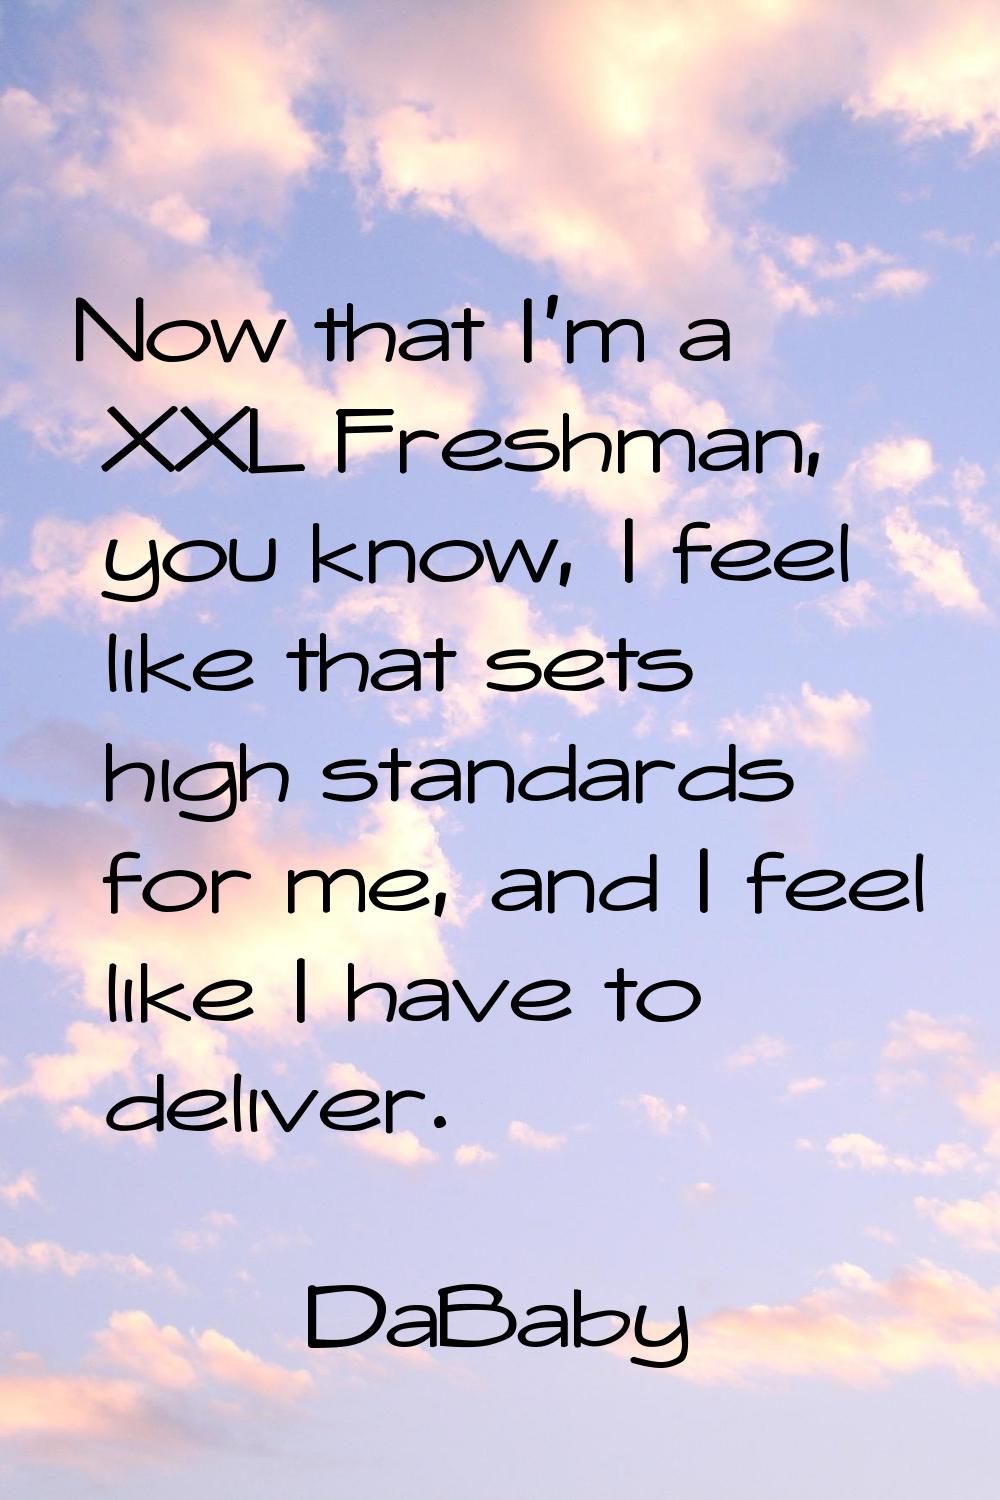 Now that I'm a XXL Freshman, you know, I feel like that sets high standards for me, and I feel like